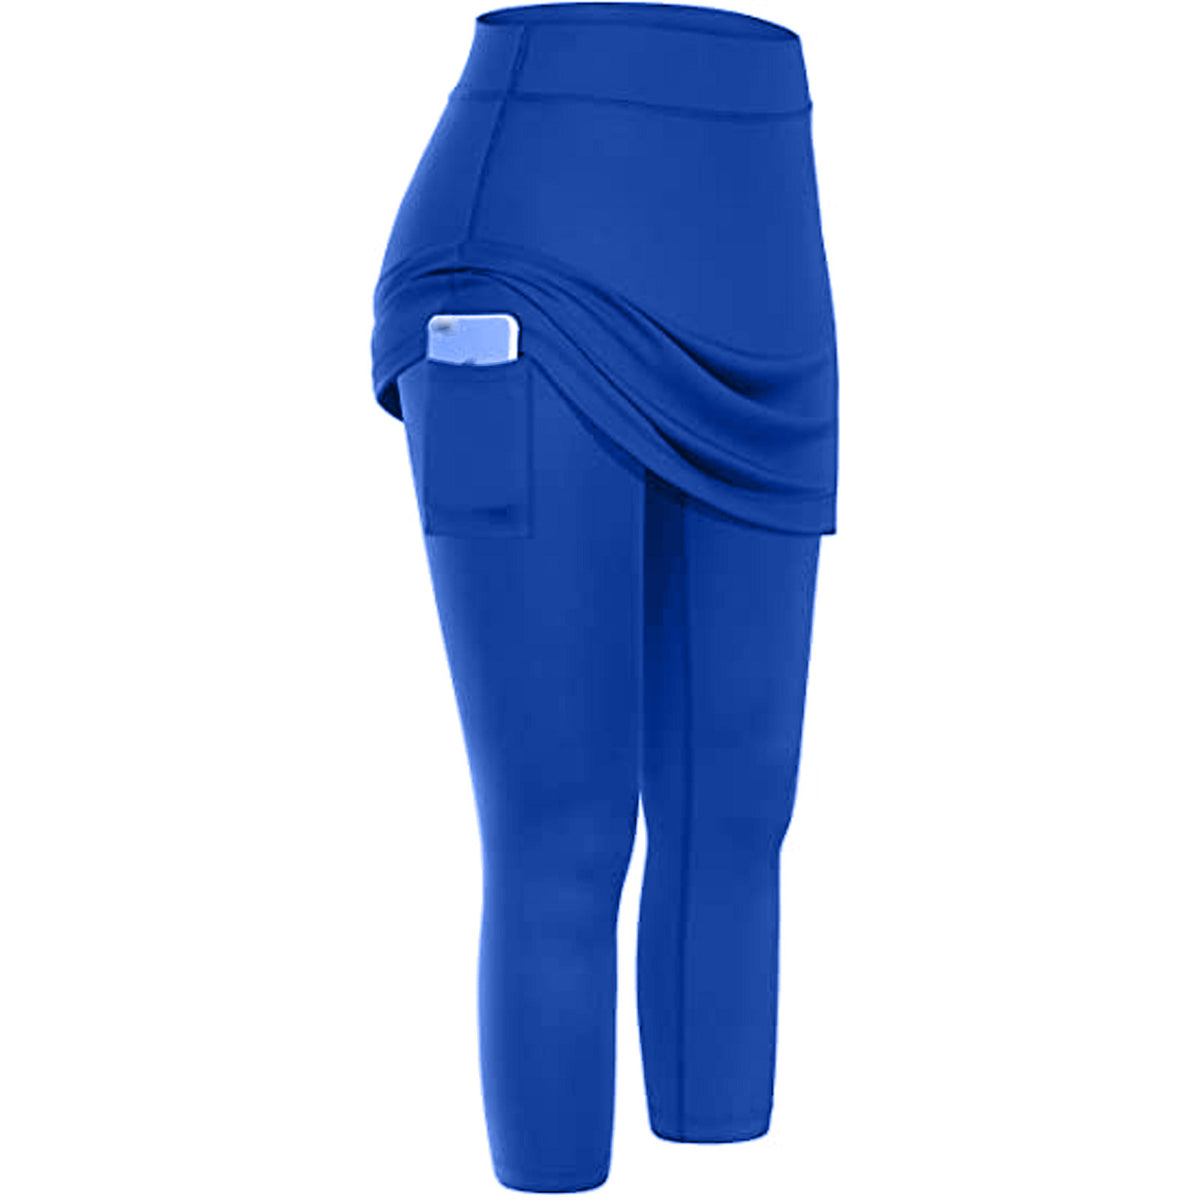 Women Leggings With Pockets Yoga Fitness Pants Sports Clothing - Collections By Jay